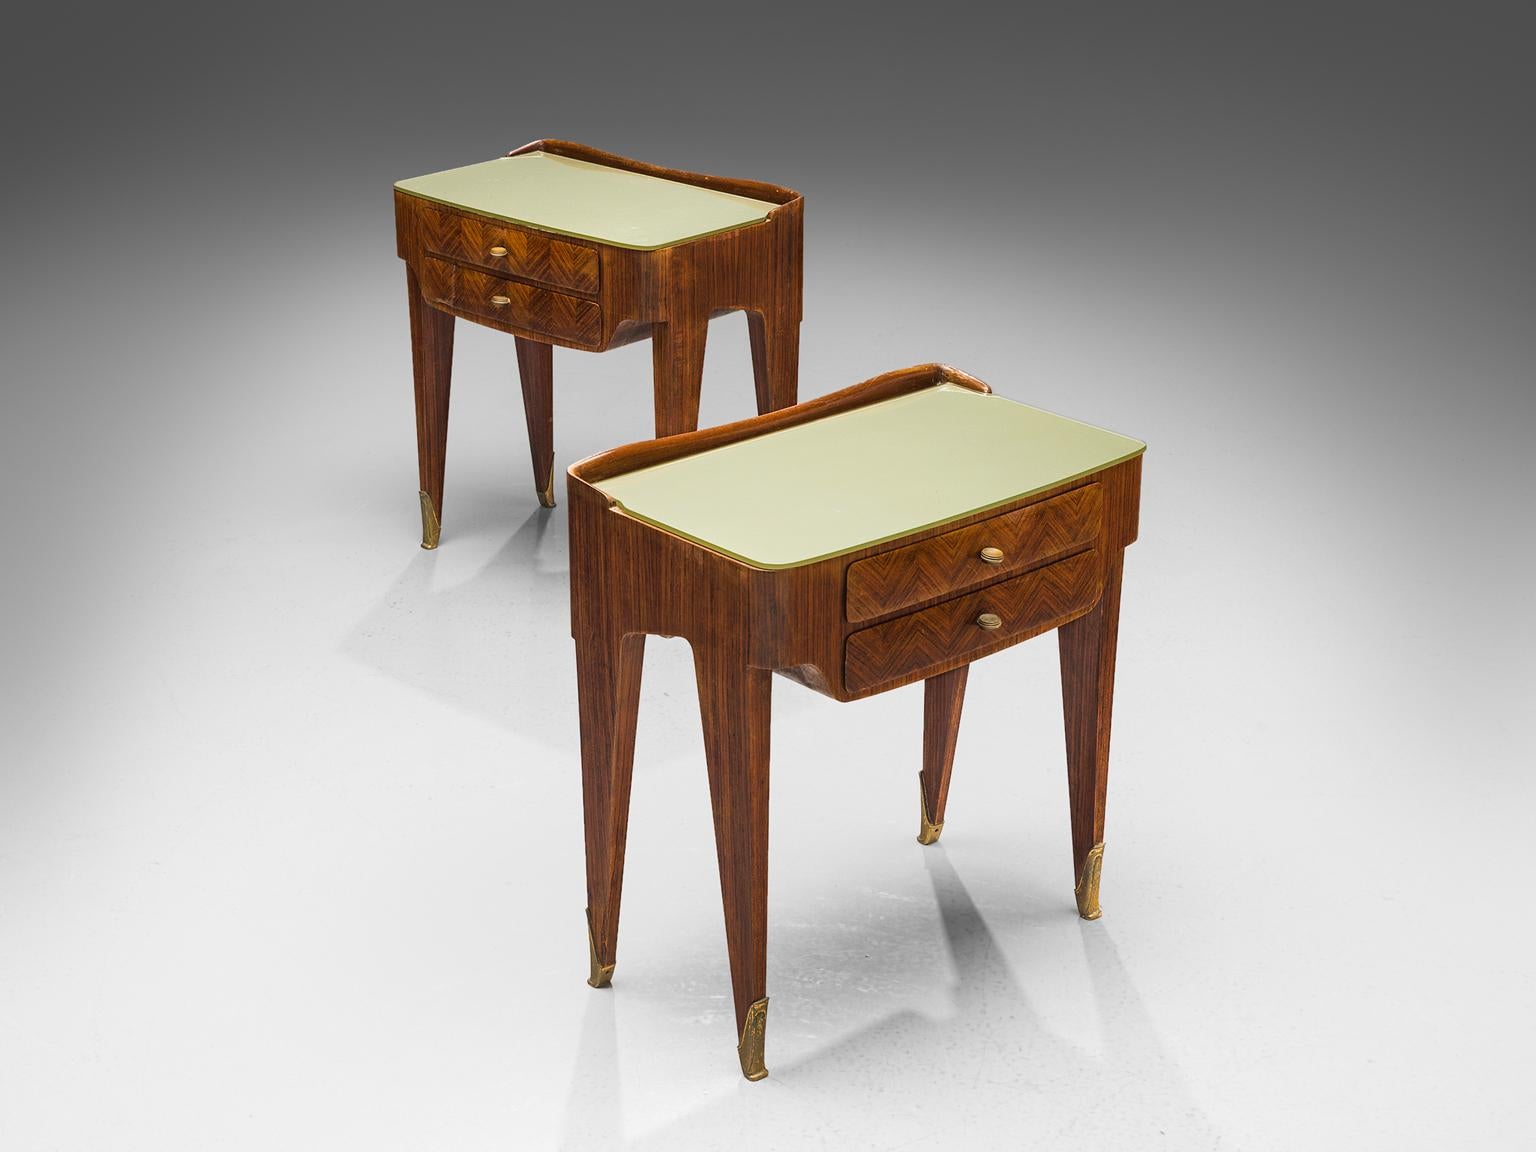 Nightstands, rosewood, glass and brass, Italy, 1950s.

These two side tables or nightstands are both refined and elegant in every way. The glass top falls perfectly on the top and is supported by precisely crafted legs. These sculptural Italian